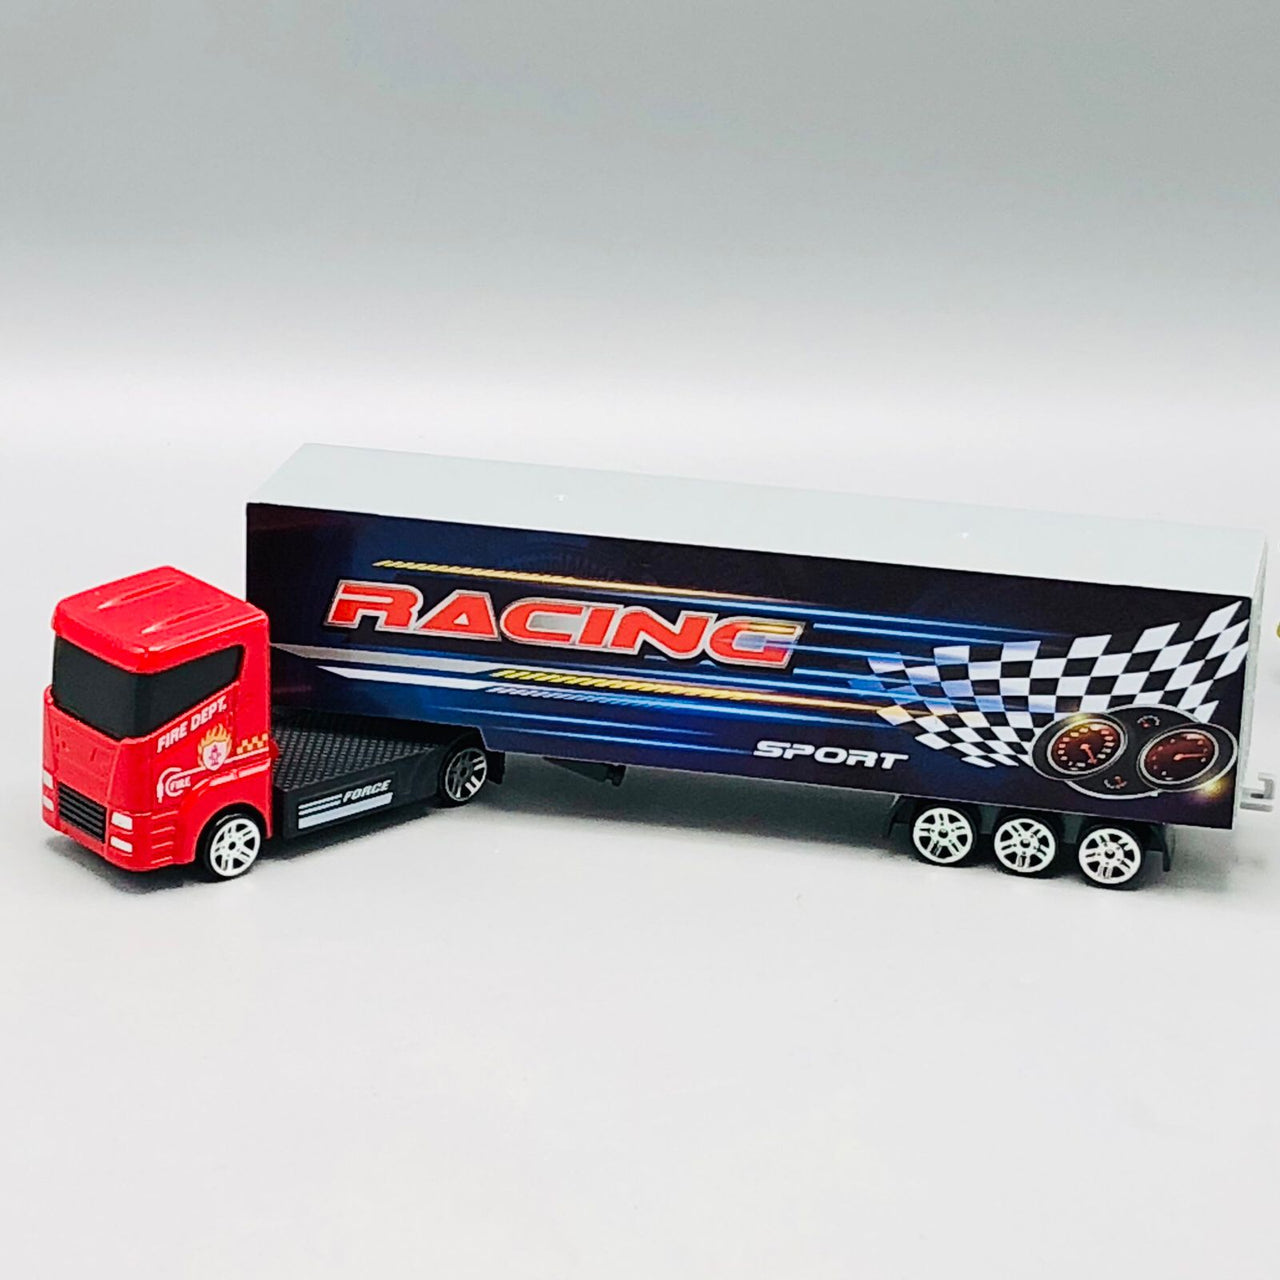 Diecast Fire Department Truck With Racing Cars